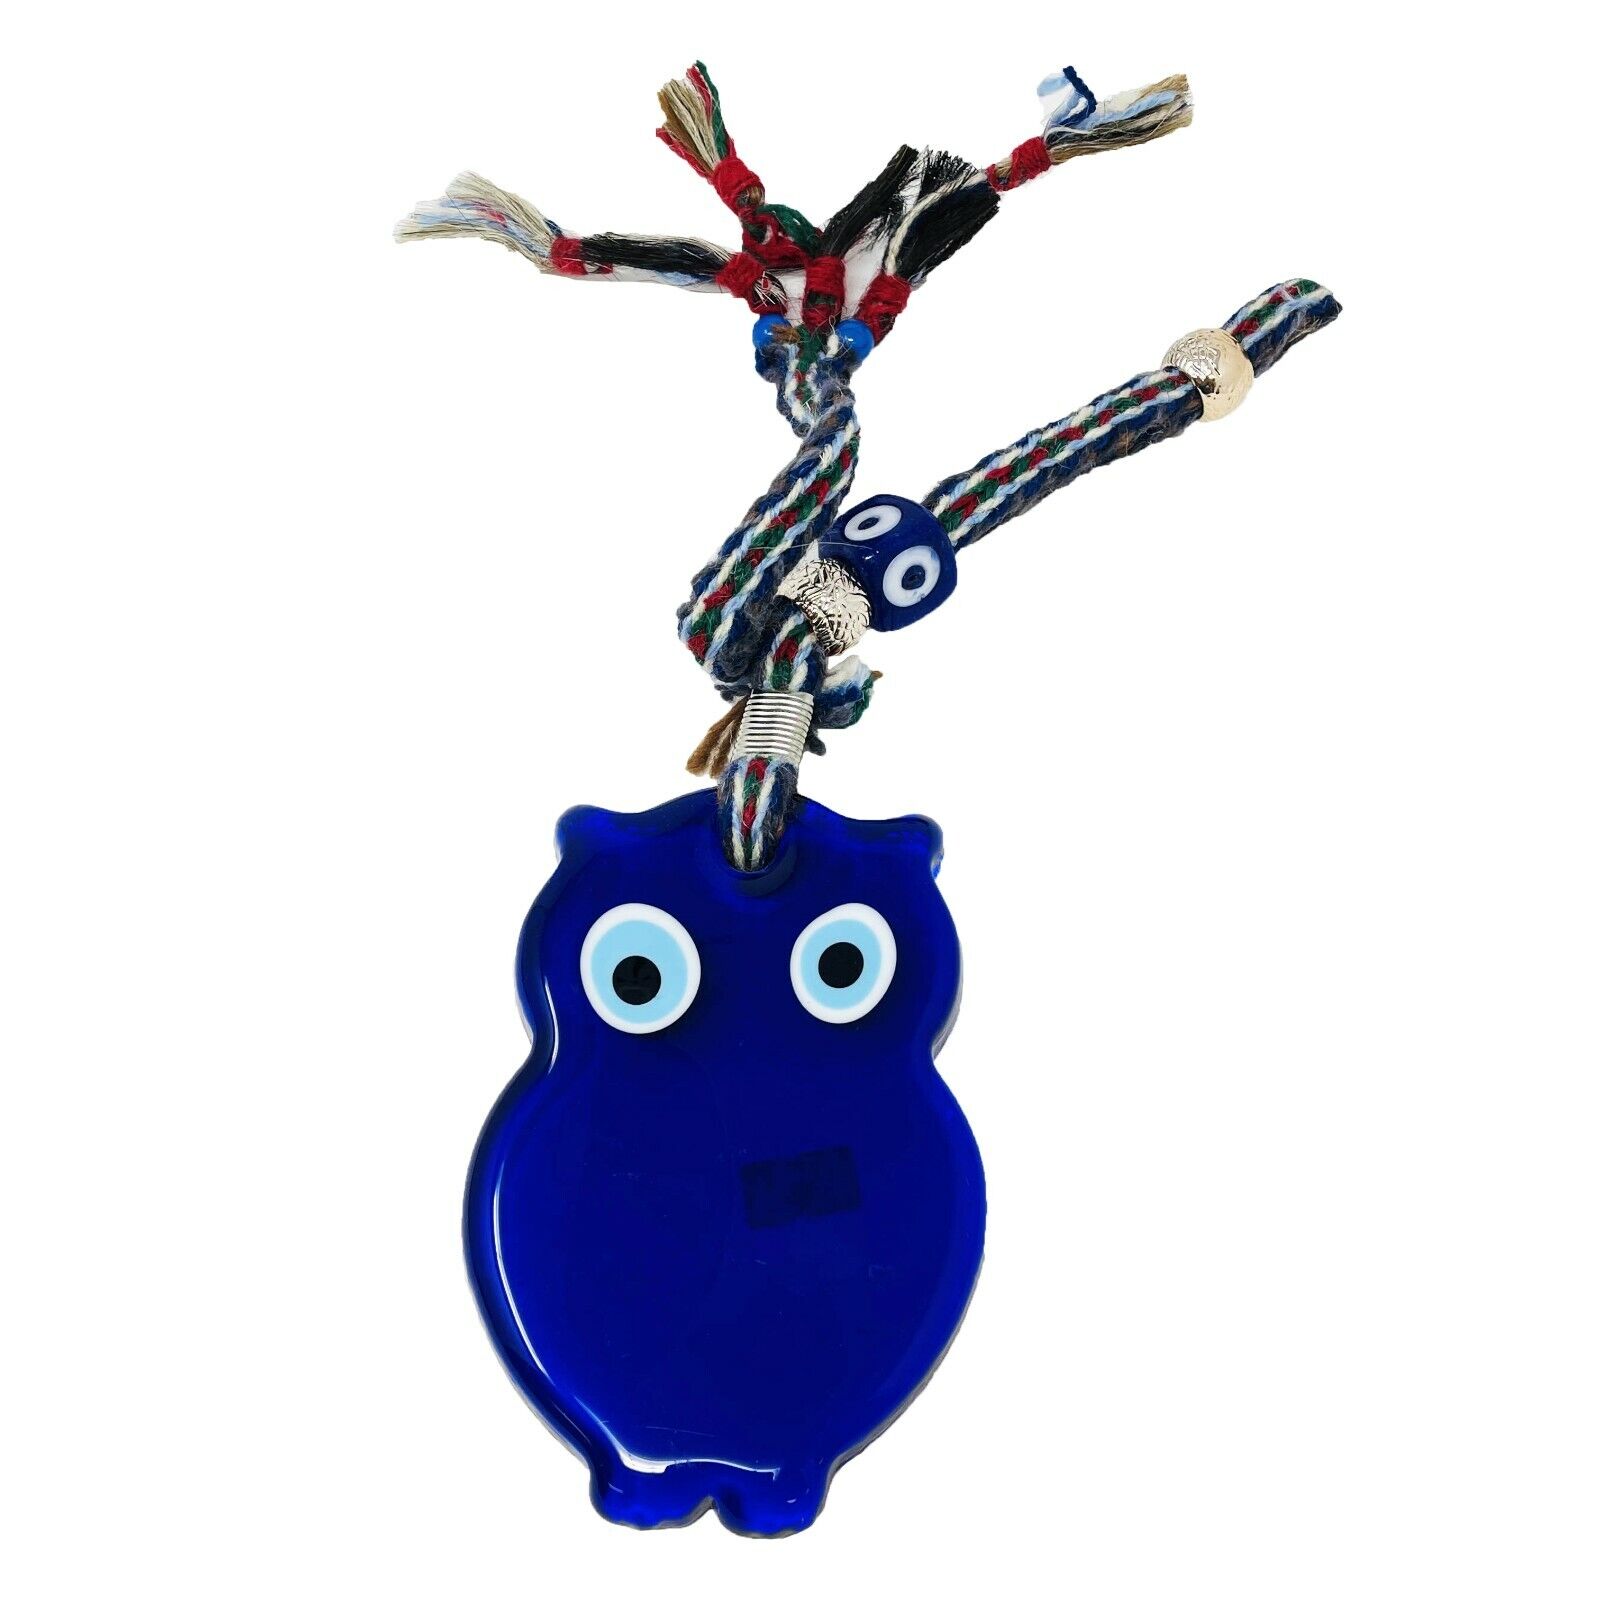 Turkish Handmade Owl Shaped Blue Evil Eye Luck Amulet Protection Wall Hanging 5"